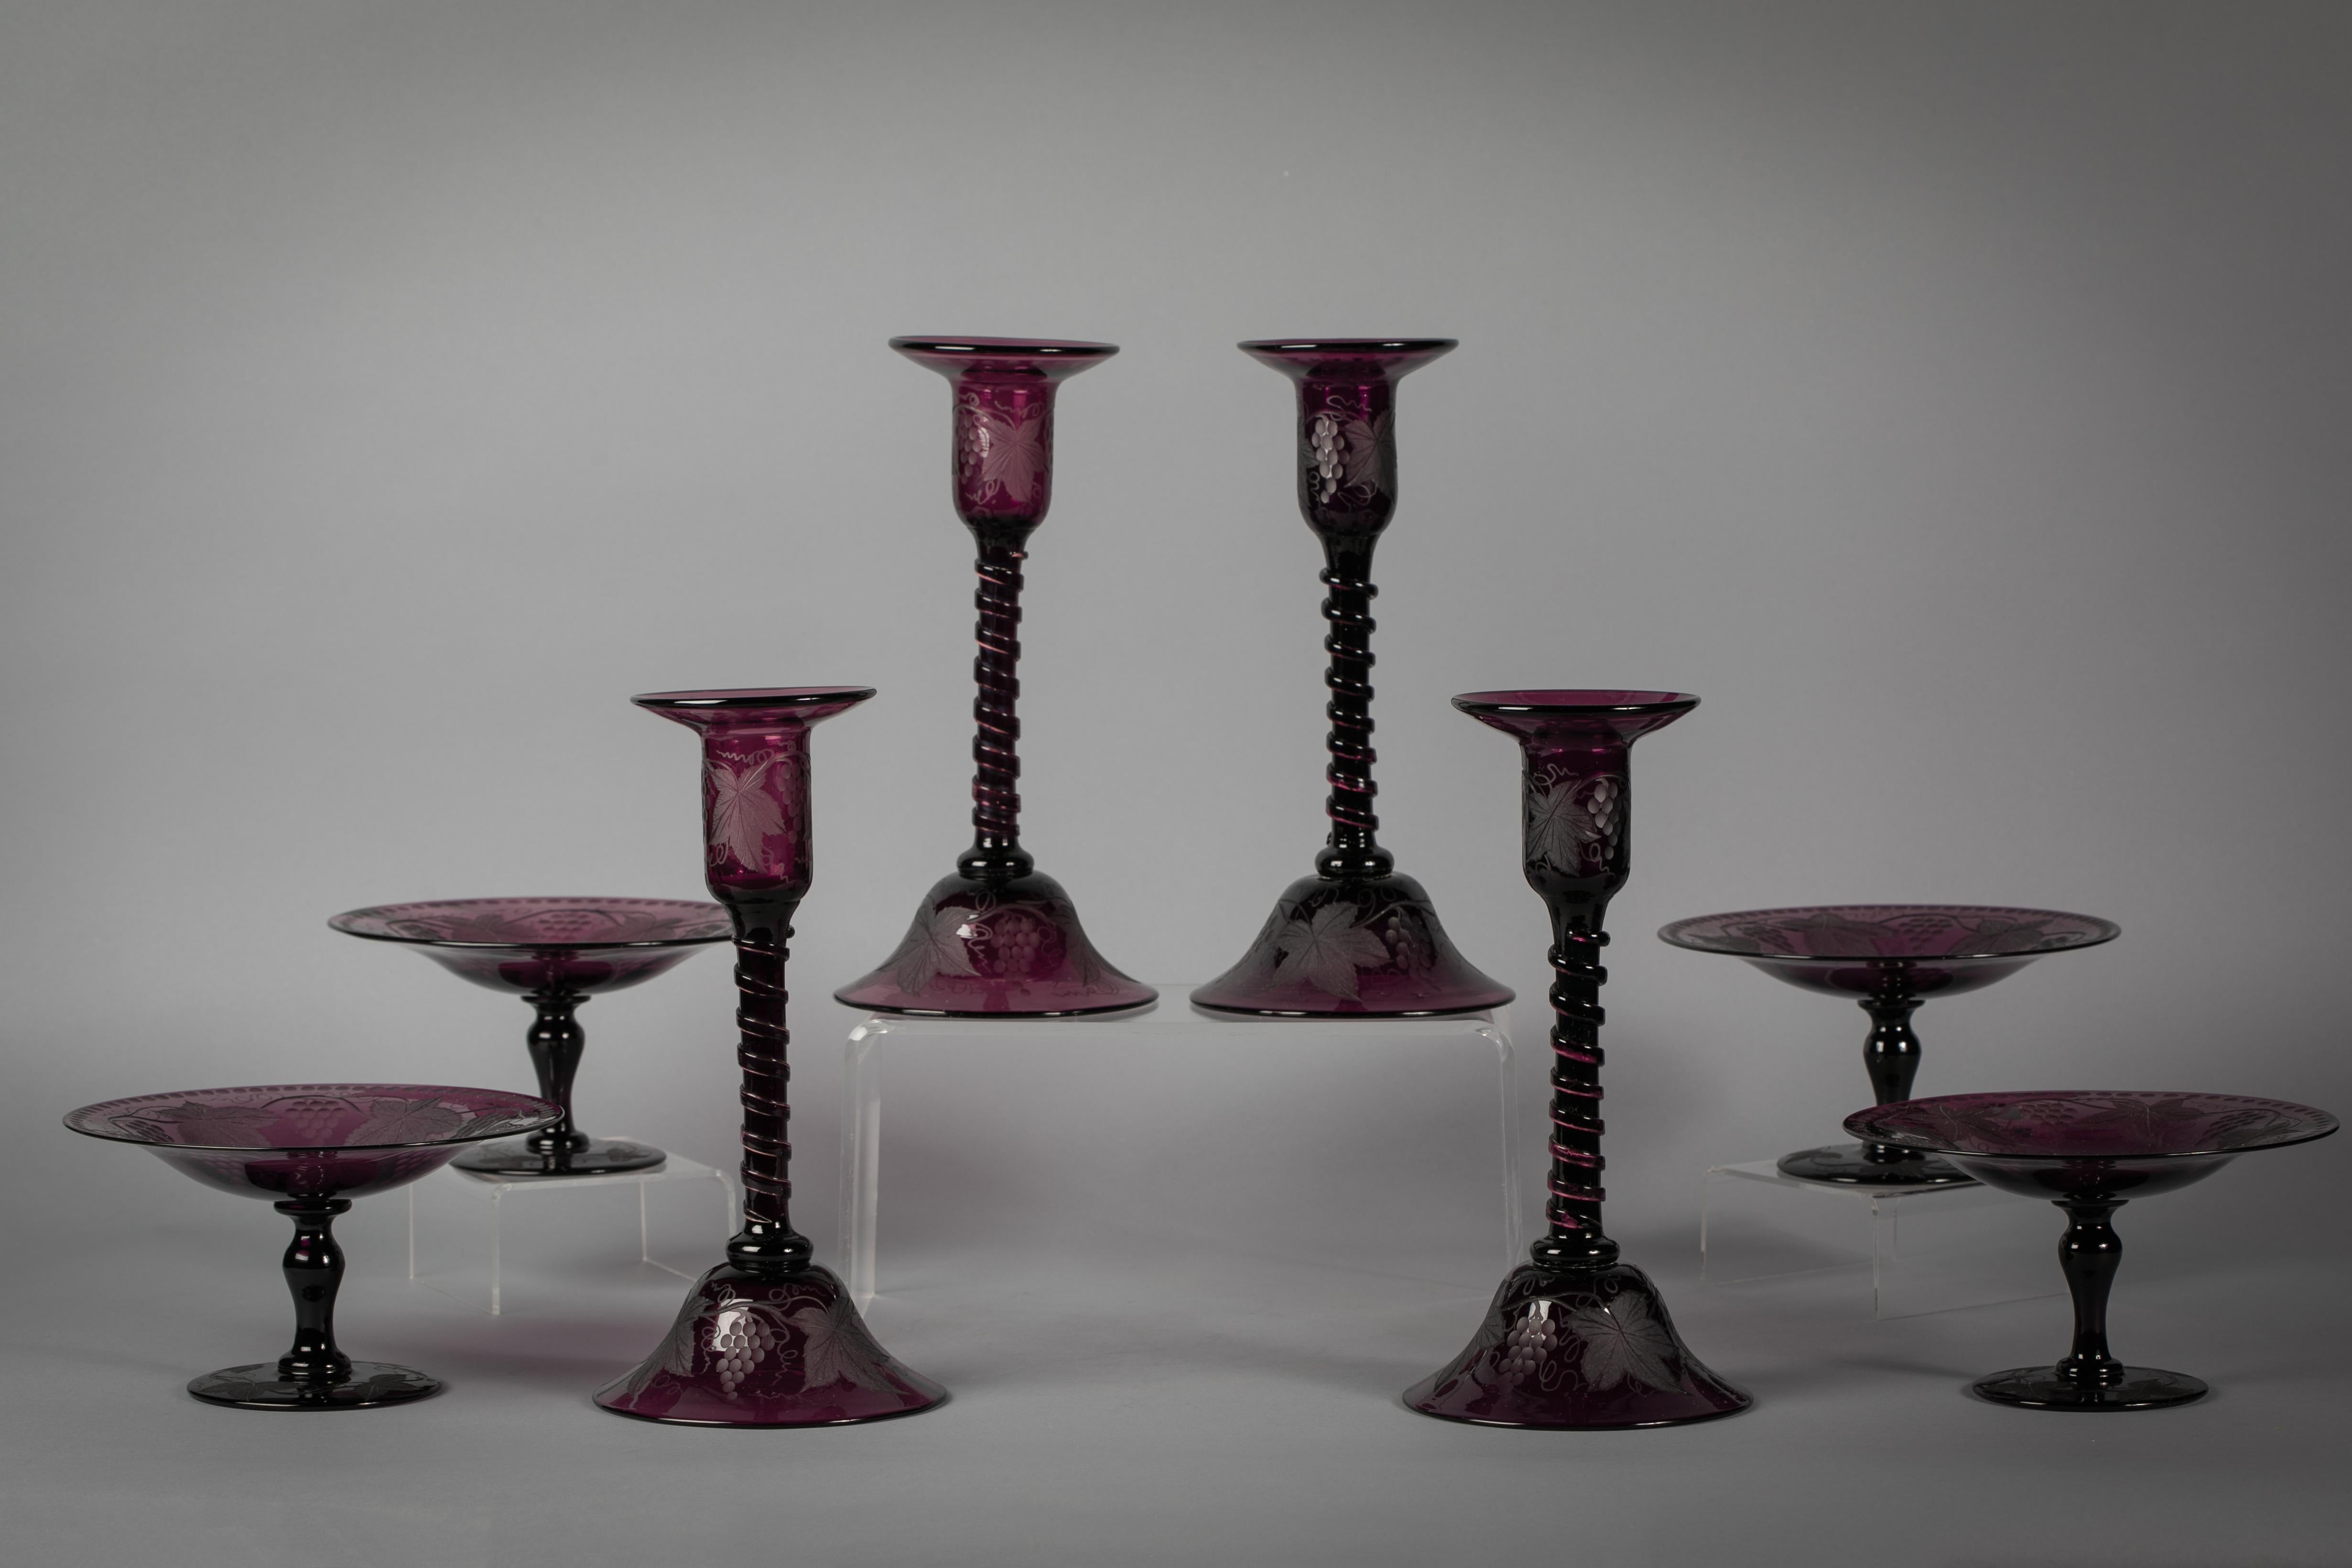 Comprising a set of four candlesticks and four compotes. With a polished amethyst ground and grape, vine and leaf engraving.